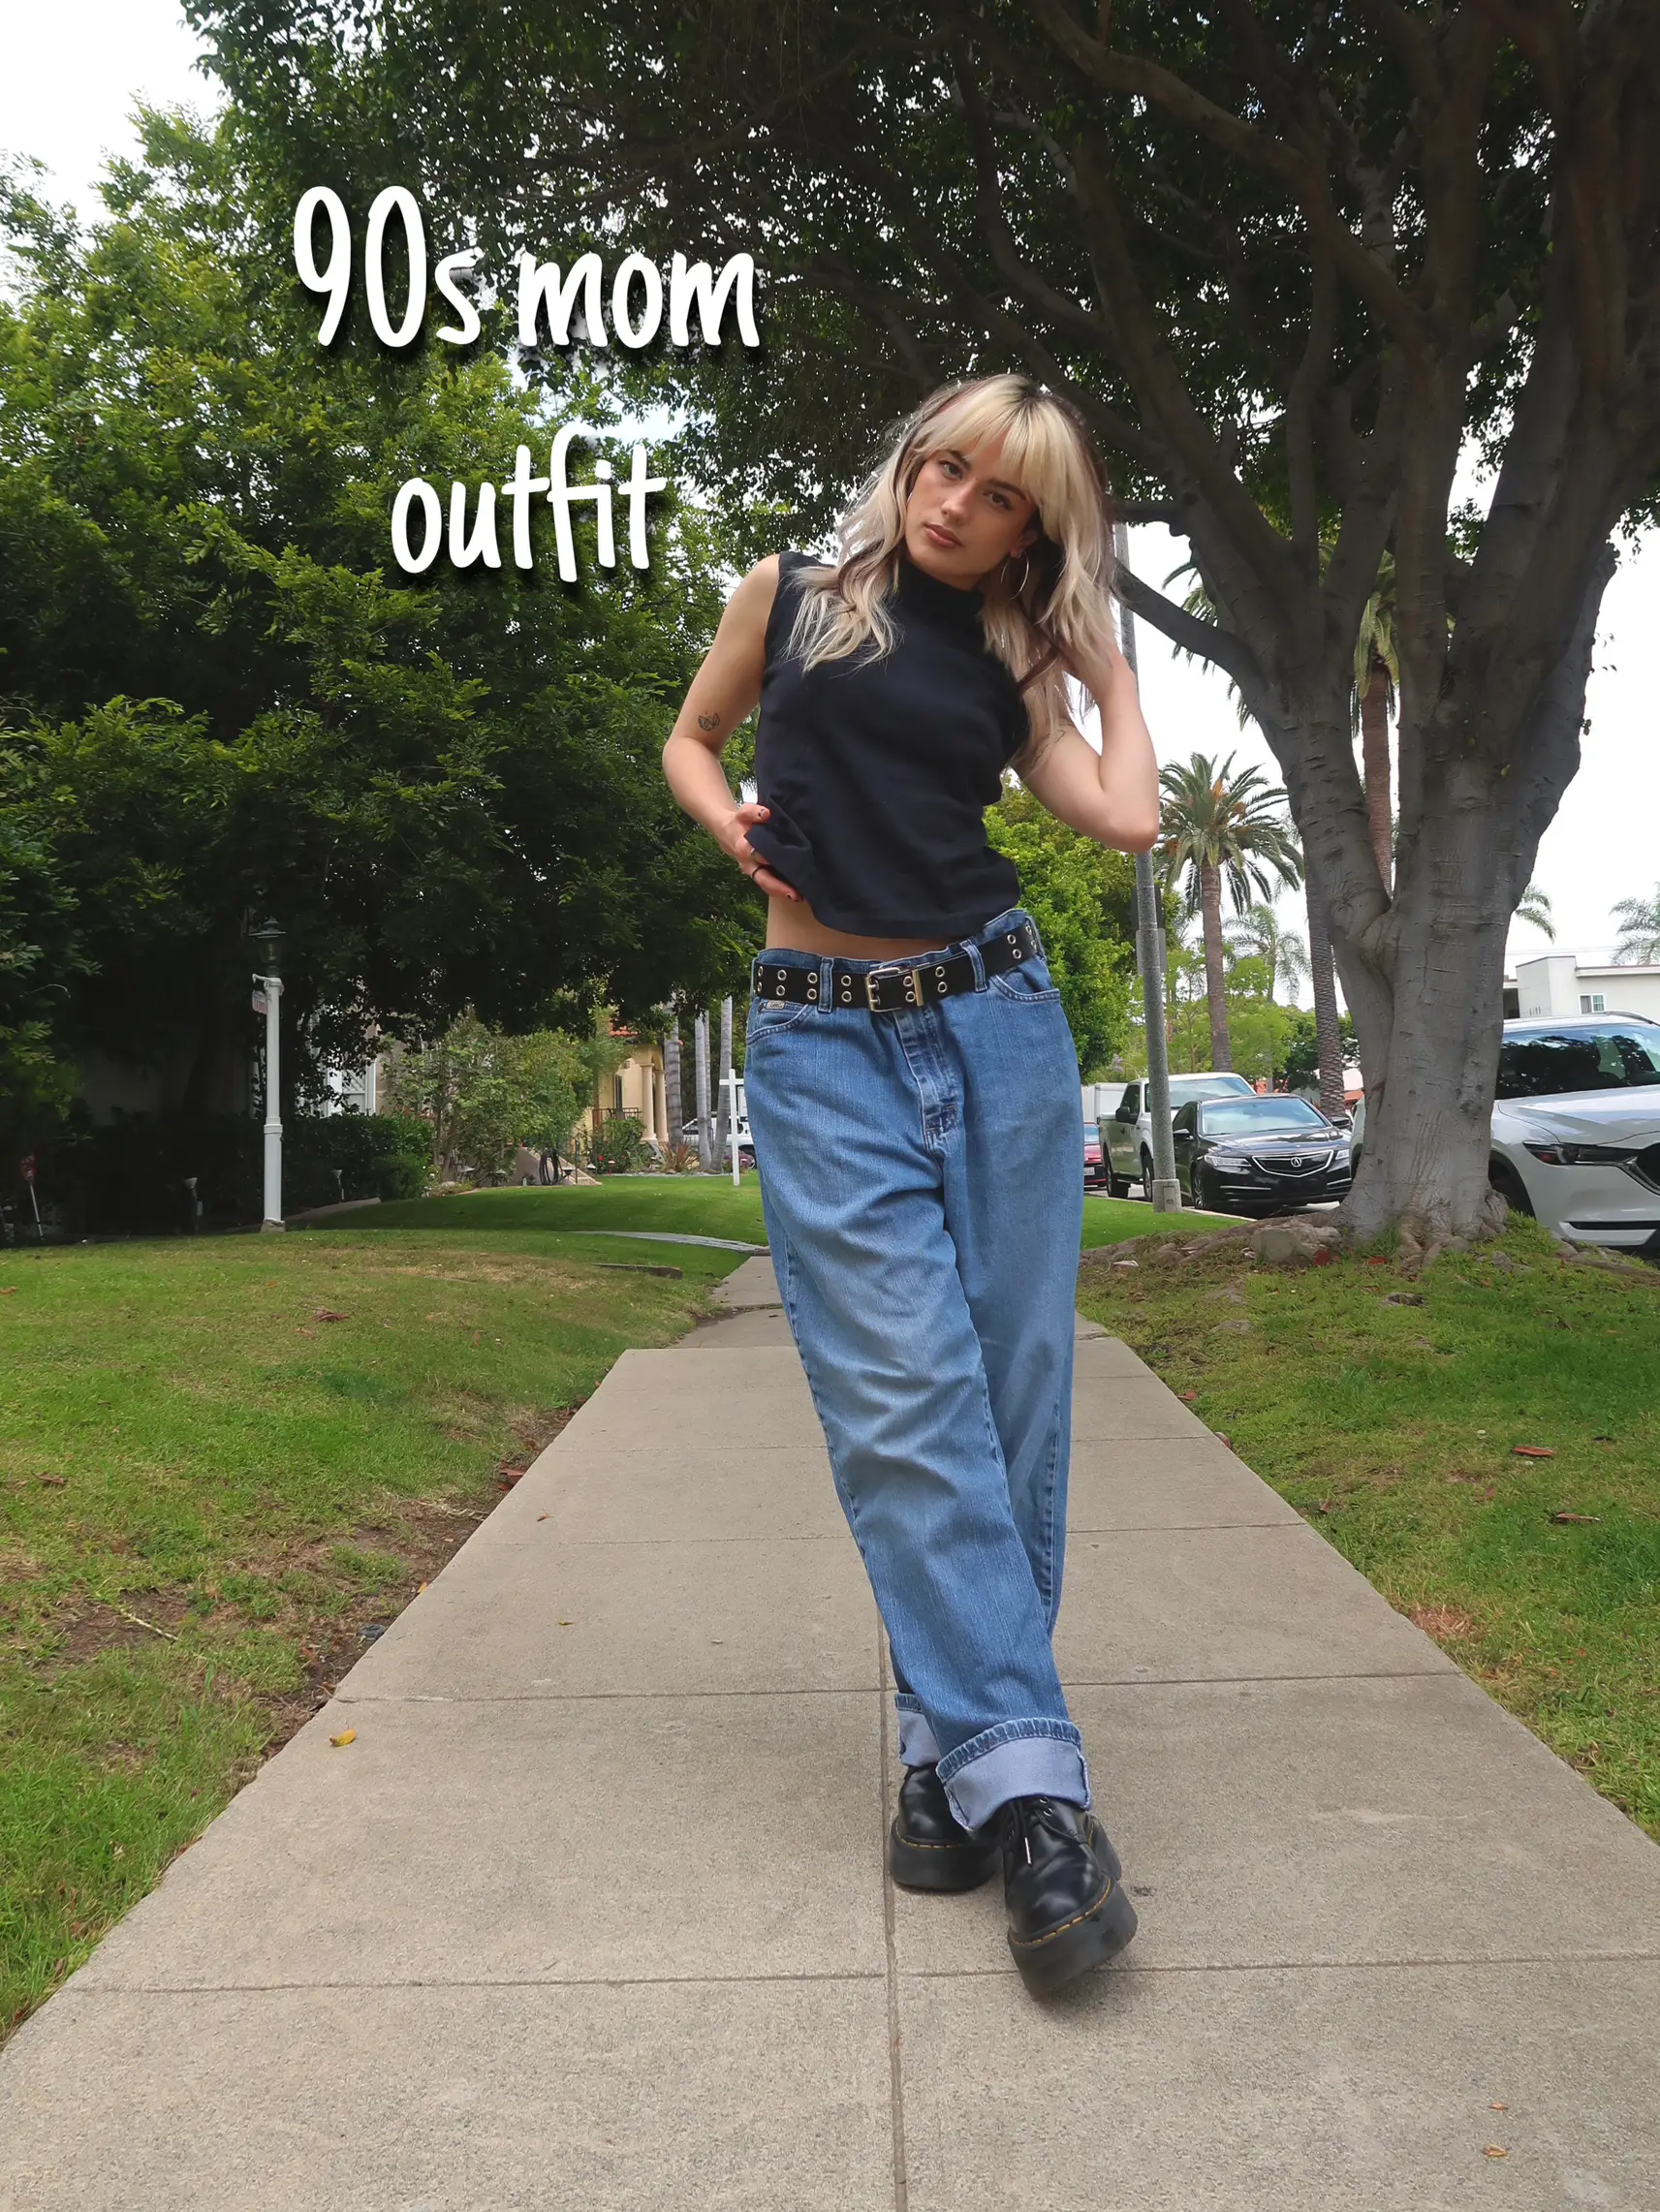 90s mom outfit inspo, Gallery posted by Lillian Kay